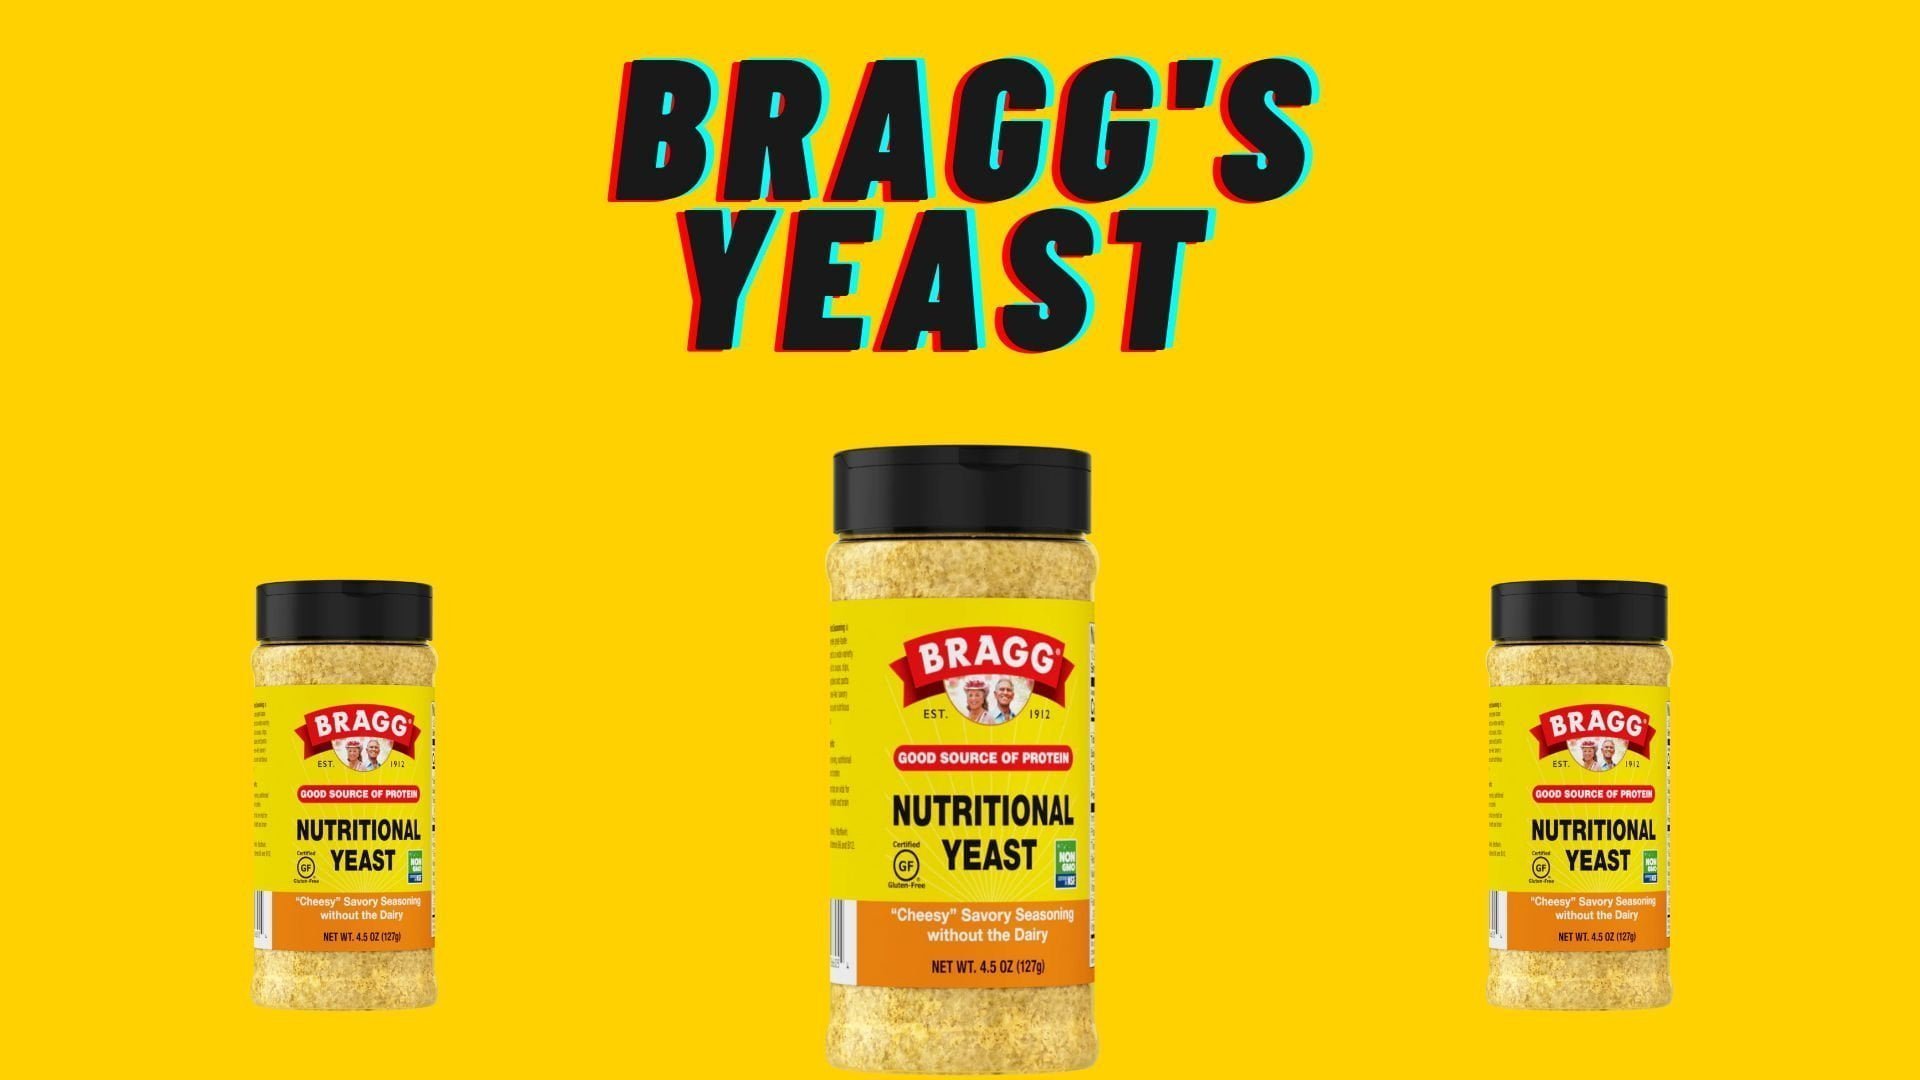 Bragg's Yeast Nutritional Facts & Benefits, Plus Recipe Ideas